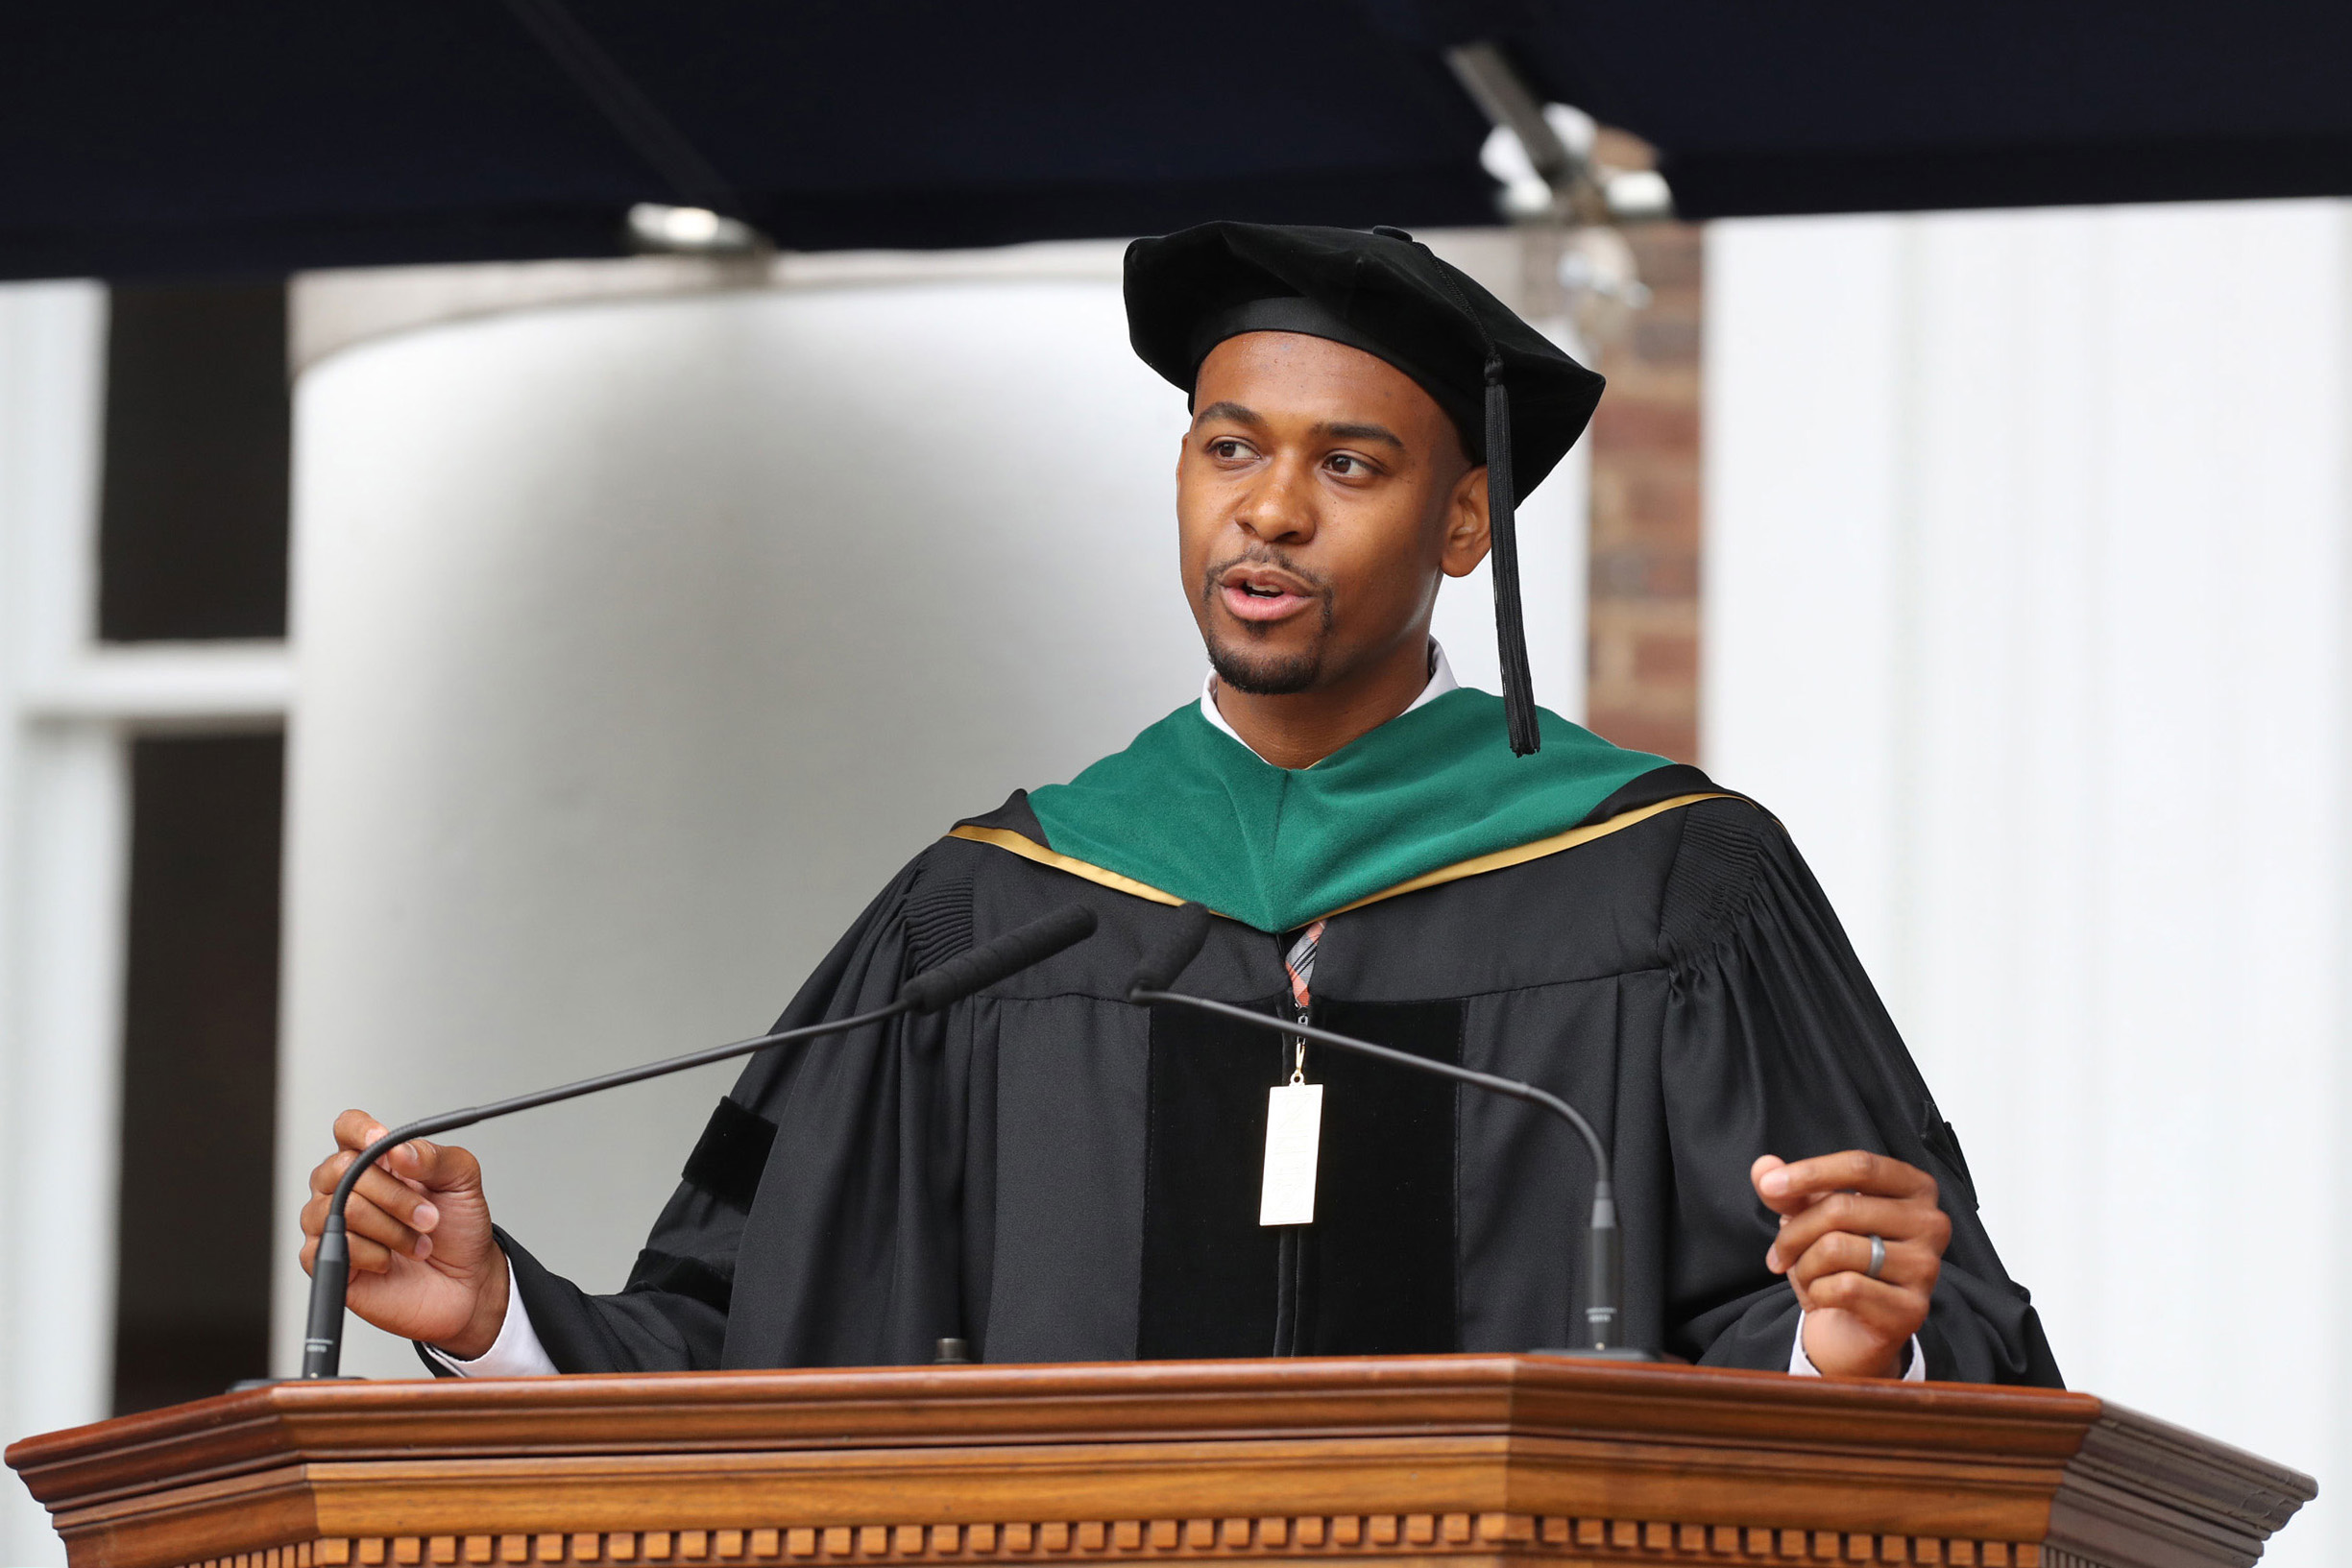 Cameron Webb stands at the podium giving a graduation speech in his doctorate cap and gown